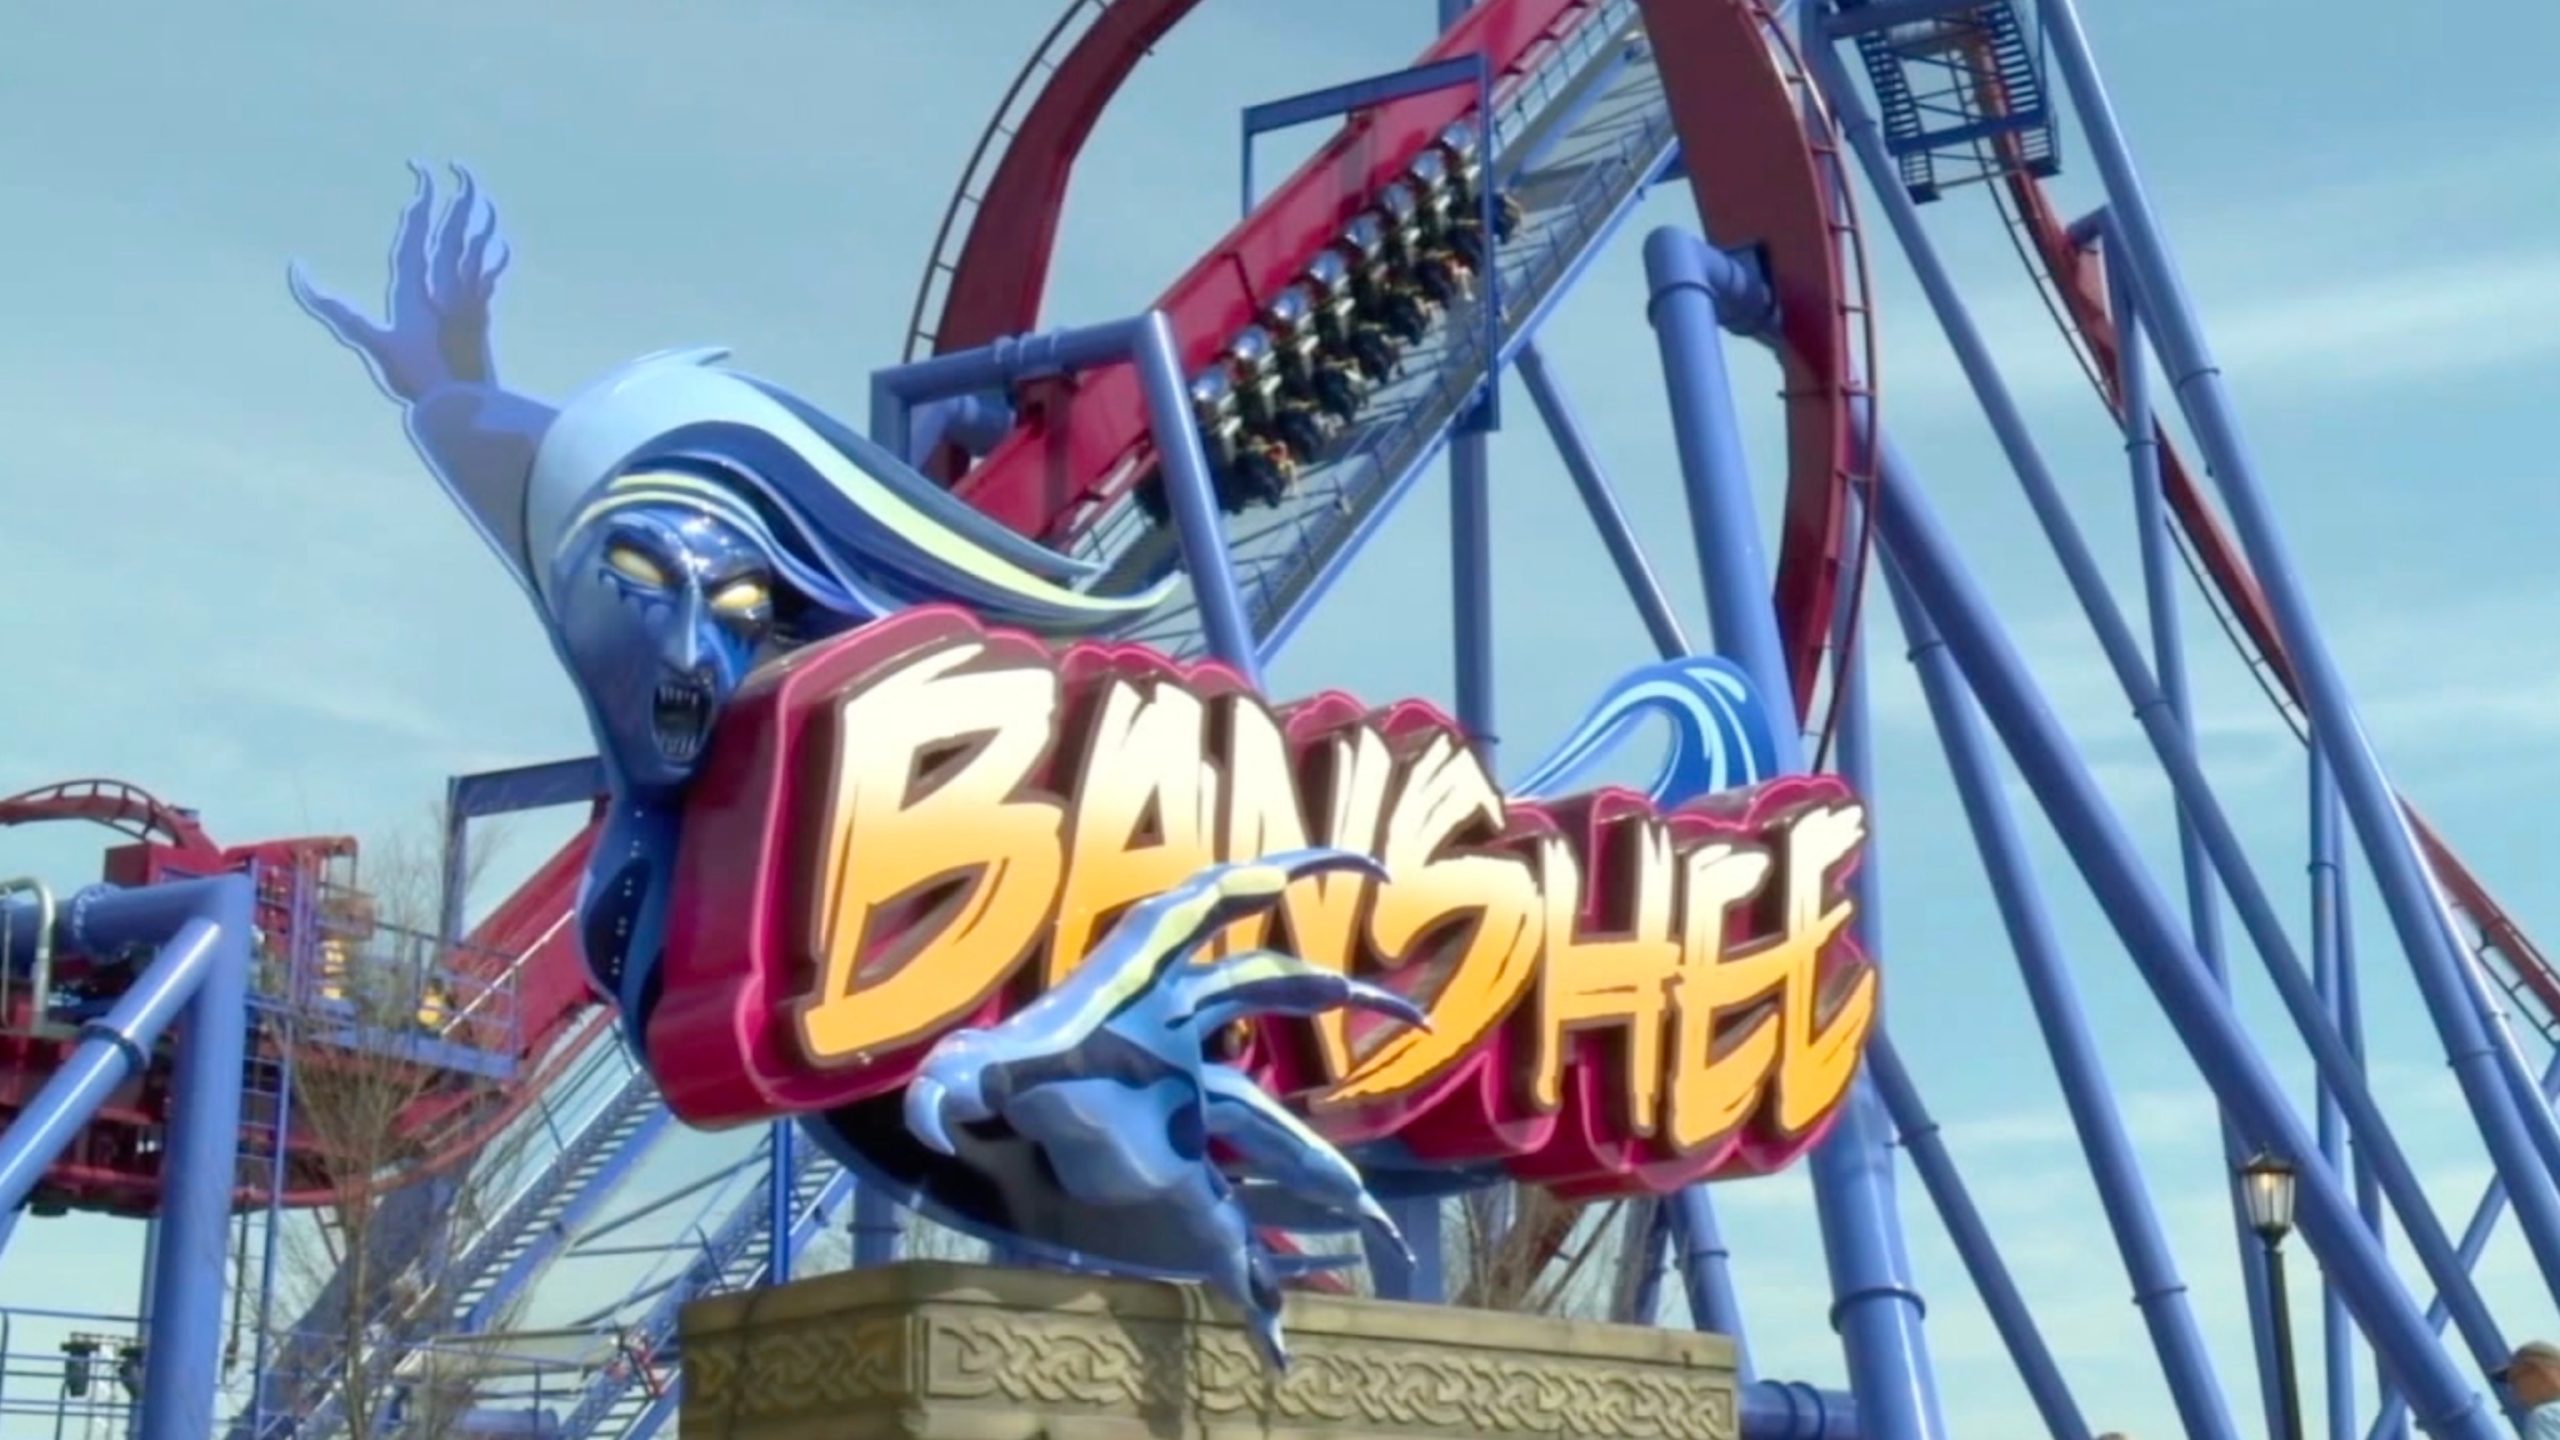 Ohio amusement park accident leaves man critically injured after being struck by roller coaster